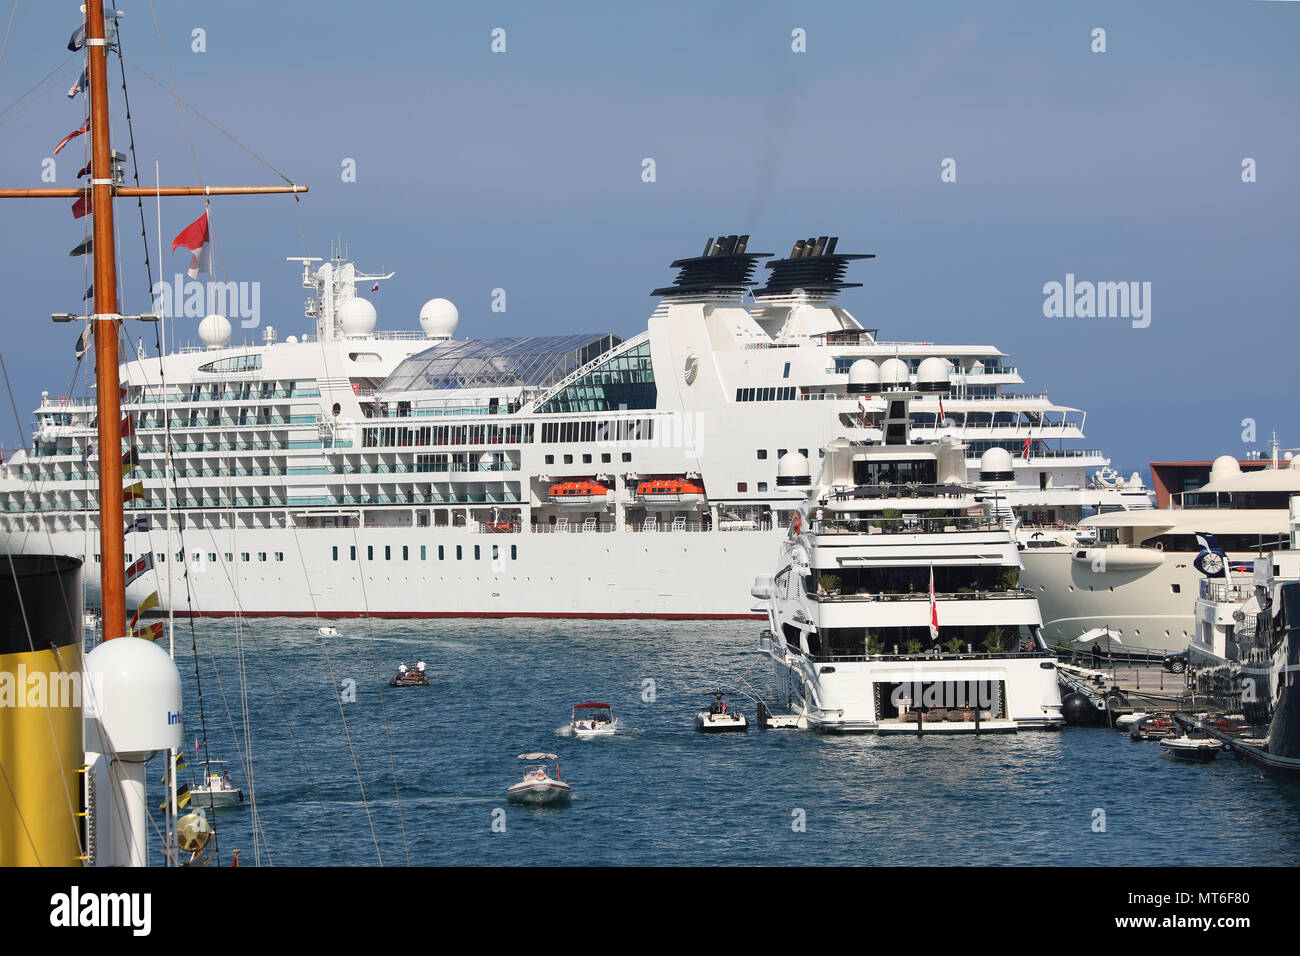 Monte-Carlo, Monaco - May 24, 2018: Rear View of a Luxury Superyacht In The Monte-Carlo Harbour (Port Hercule), Cruise Liner in The Background. Princi Stock Photo